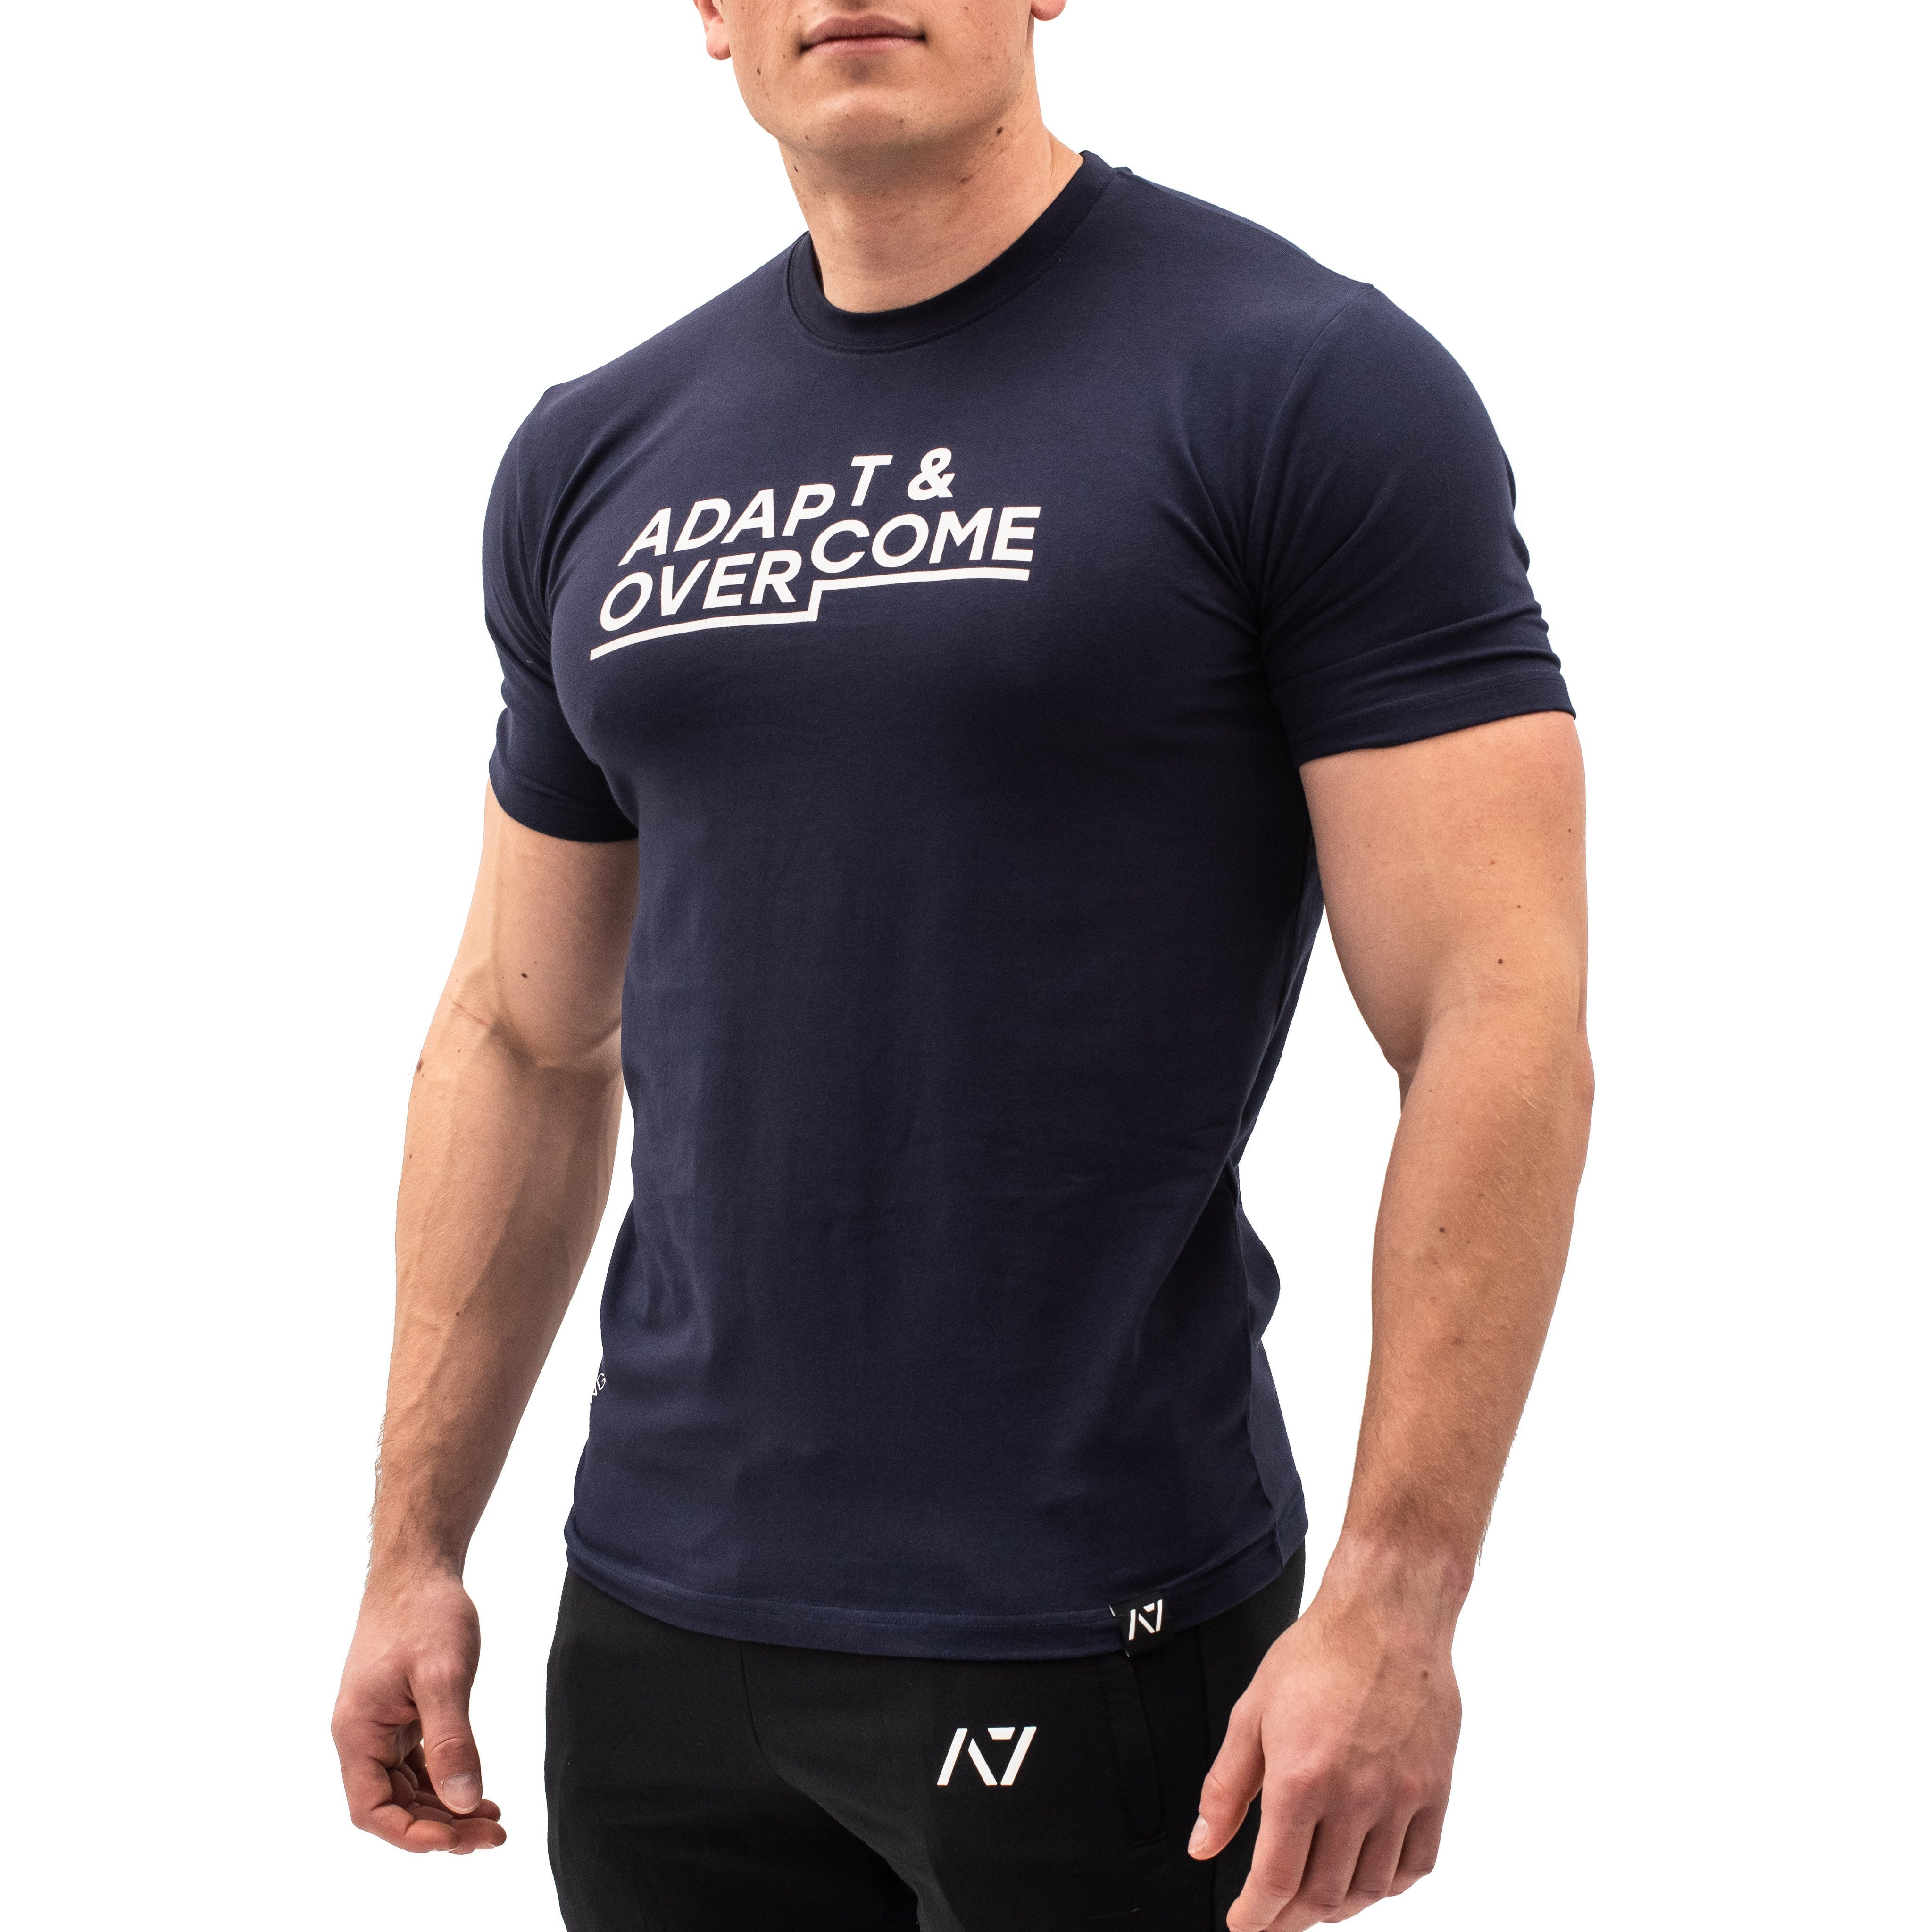 Adapt & Overcome Bar Grip T-shirt, great as a squat shirt. Purchase Adapt & Overcome Bar Grip tshirt UK from A7 UK or A7 Europe. No more chalk and no more sliding. Best Bar Grip Tshirts, shipping to UK and Europe from A7 UK or A7 Europe. The best Powerlifting apparel for all your workouts. Available in UK and Europe including France, Italy, Germany, Sweden and Poland